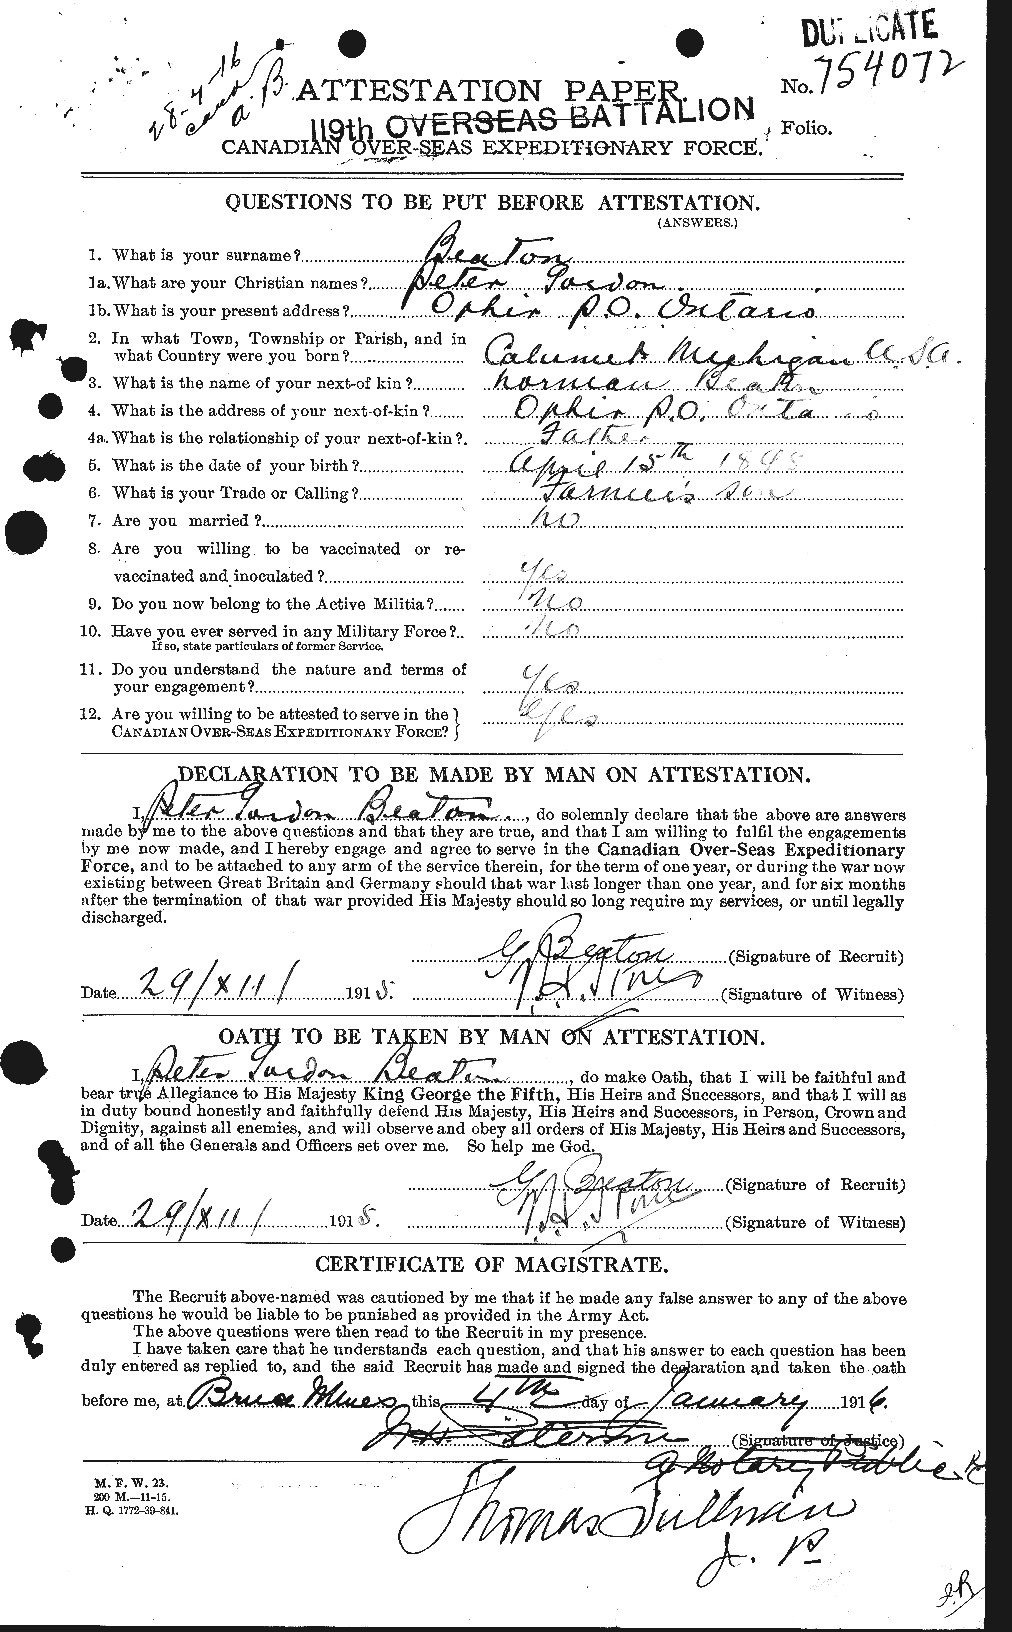 Personnel Records of the First World War - CEF 230579a